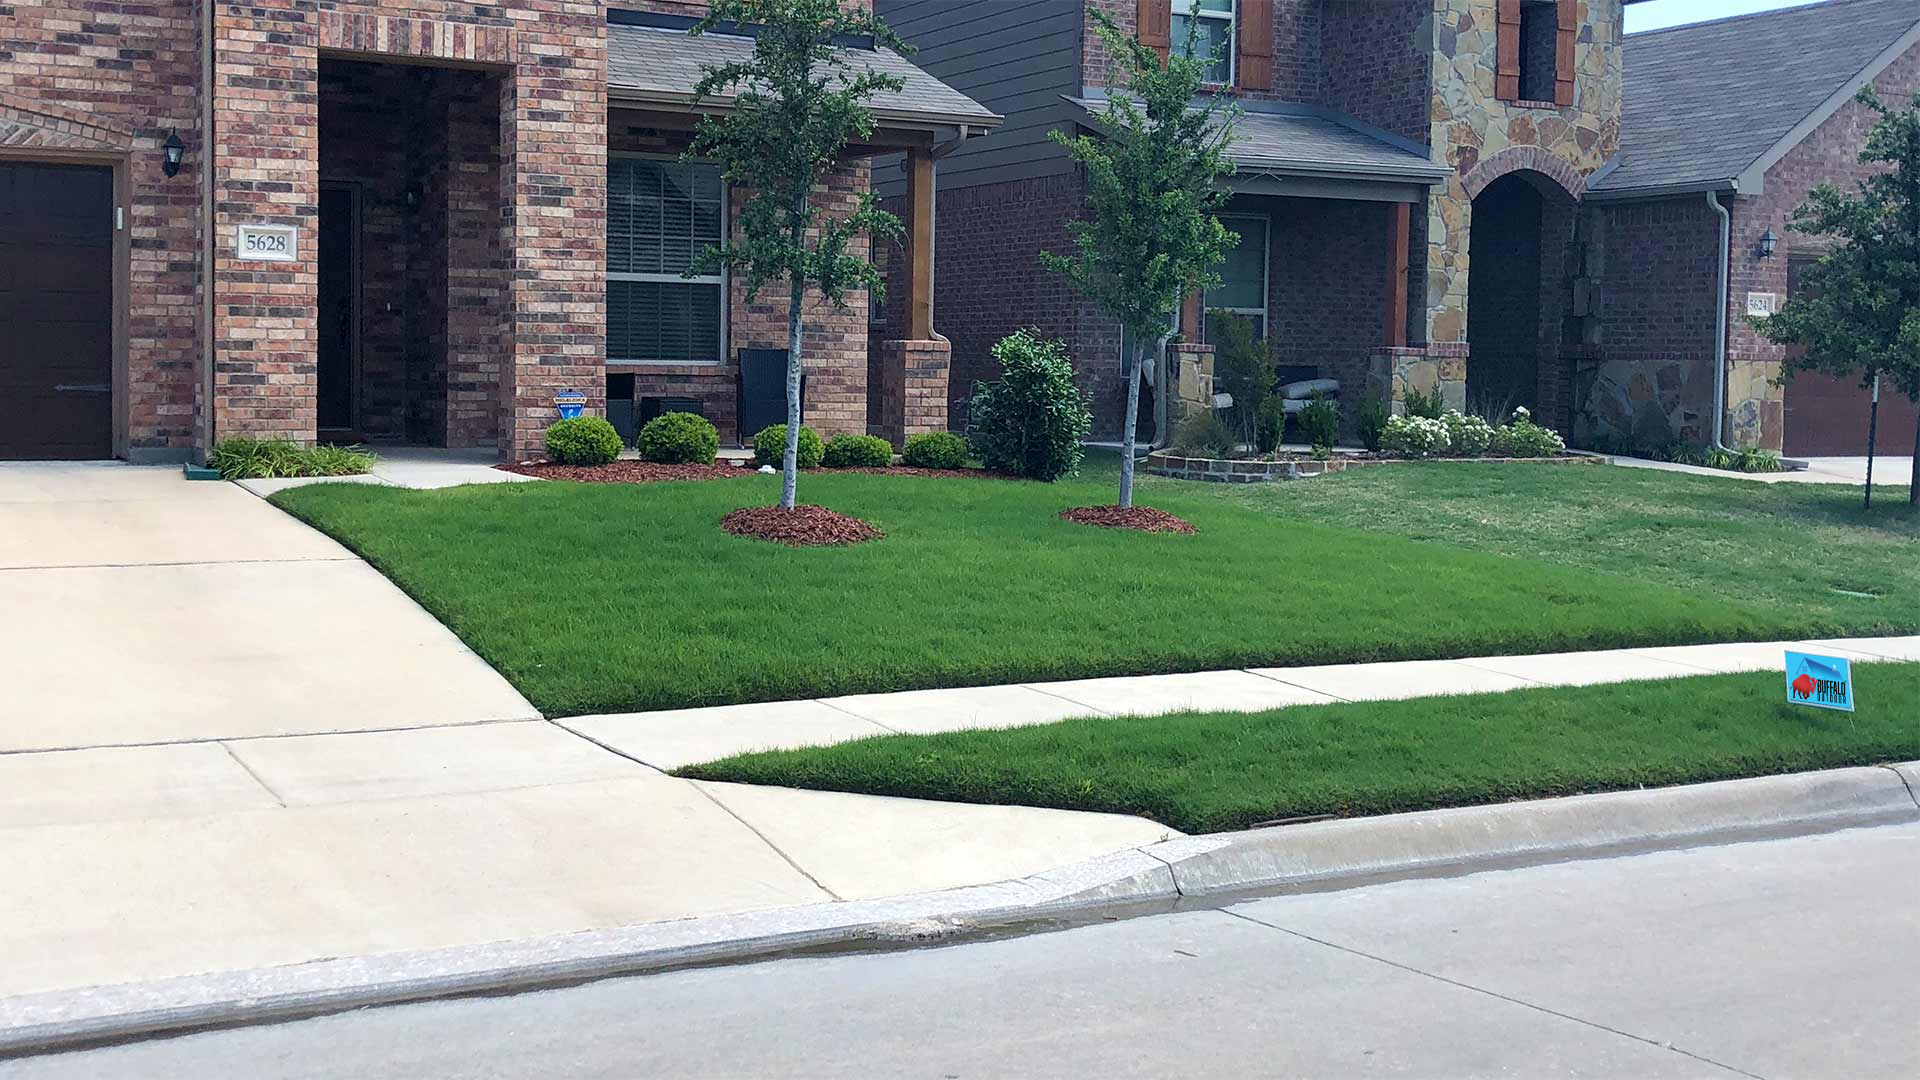 Aledo, TX home with regular lawn and maintenance services.